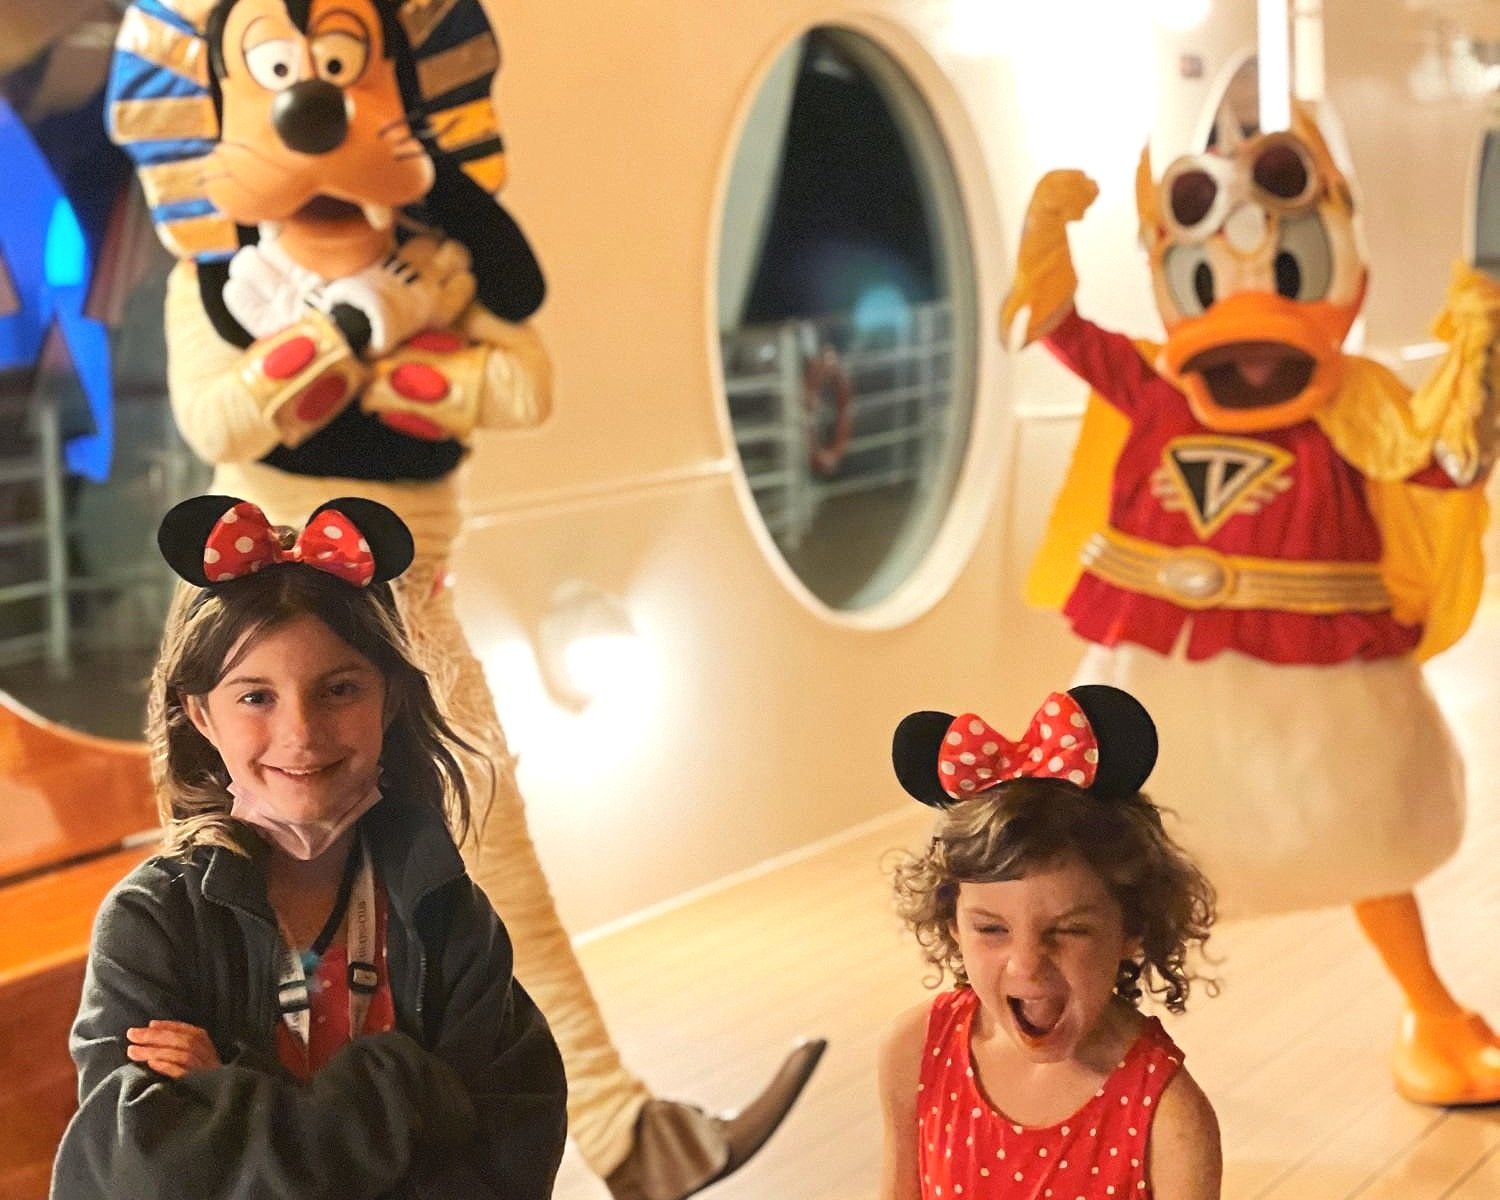 Two young girls with matching minnie mouse ears and dresses pose in front of goofy and donald dressed in halloween costumes on disney cruise for halloween on the high seas.